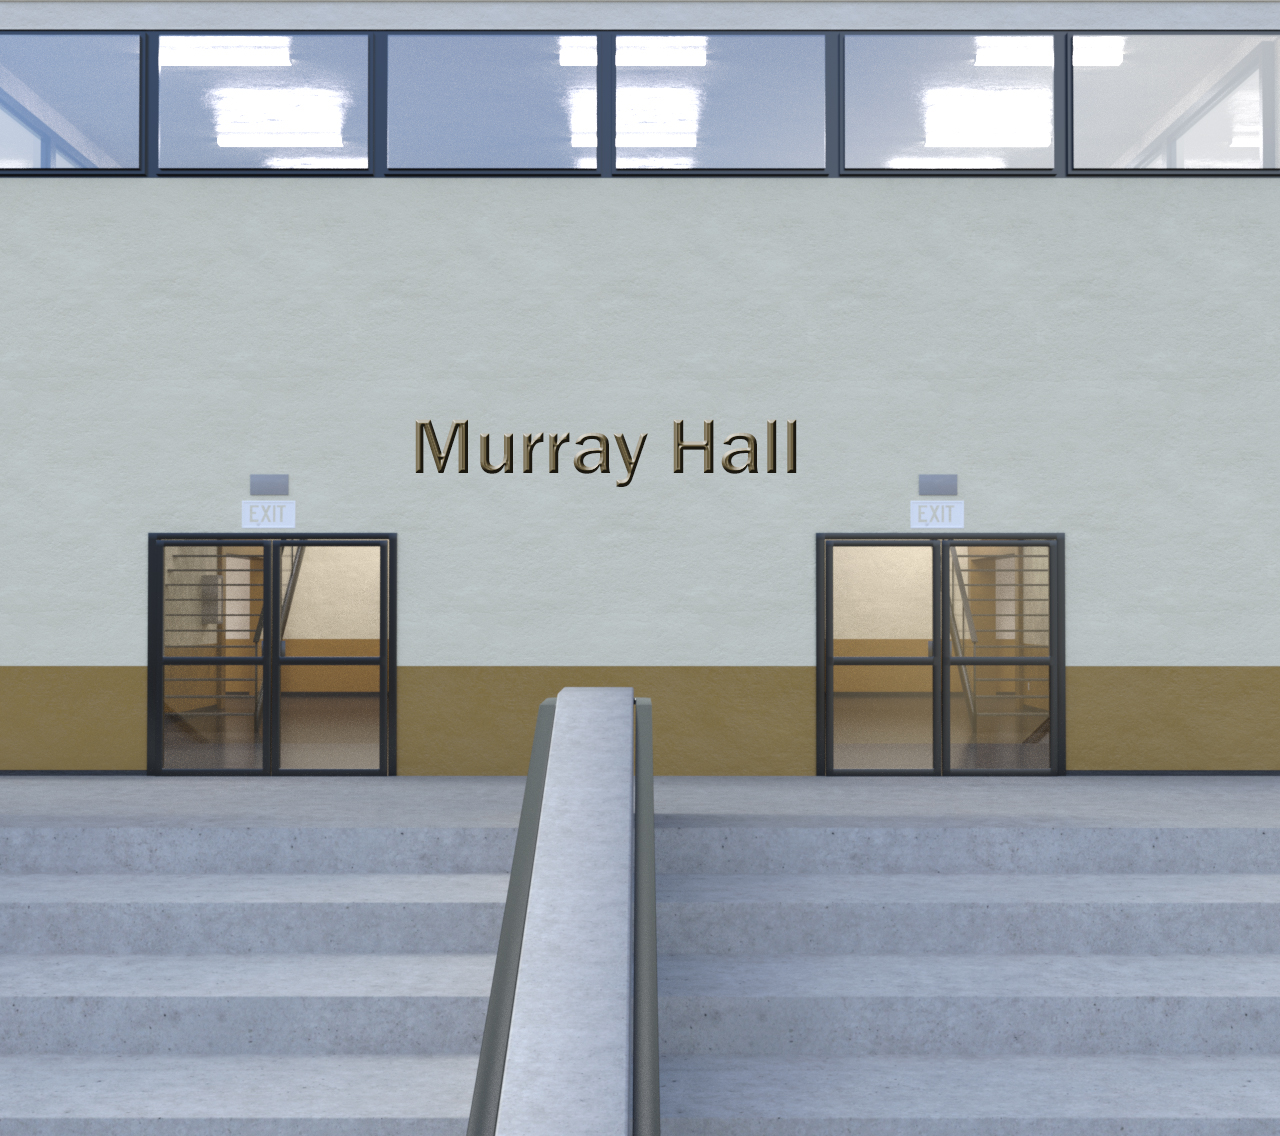 EXT. MURRAY HALL – DAY